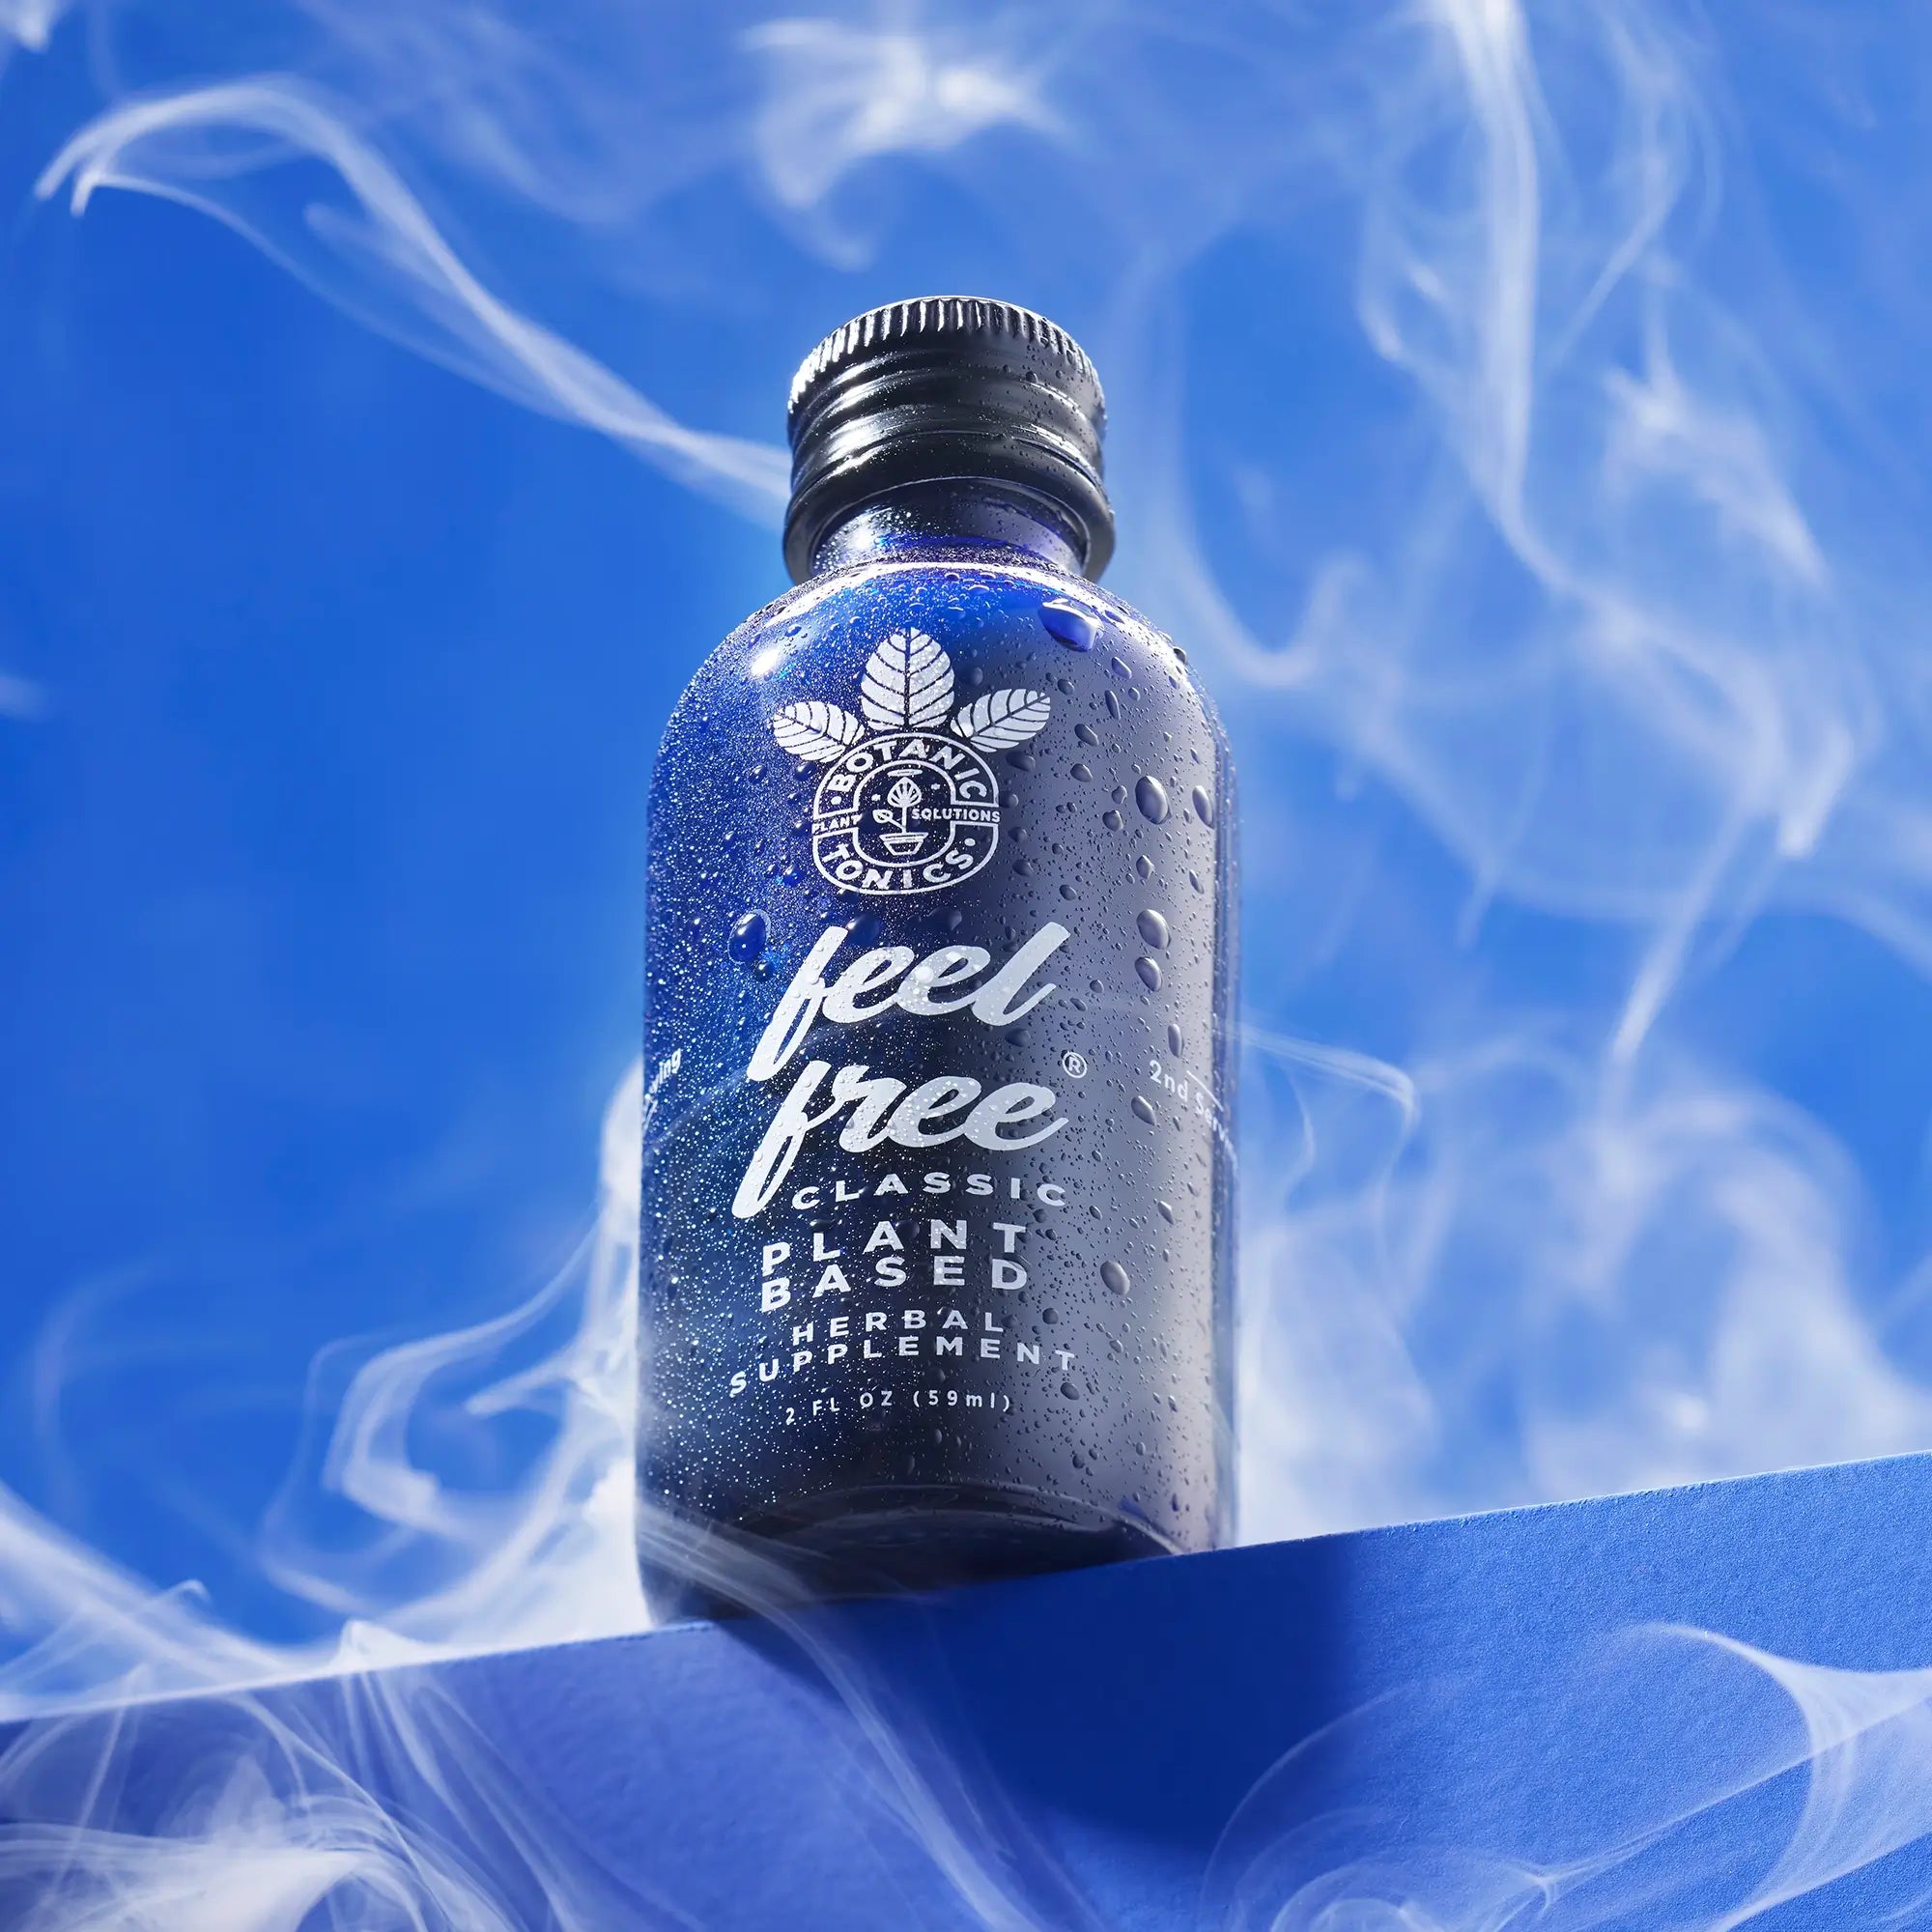 feel free CLASSIC in a smoky environment